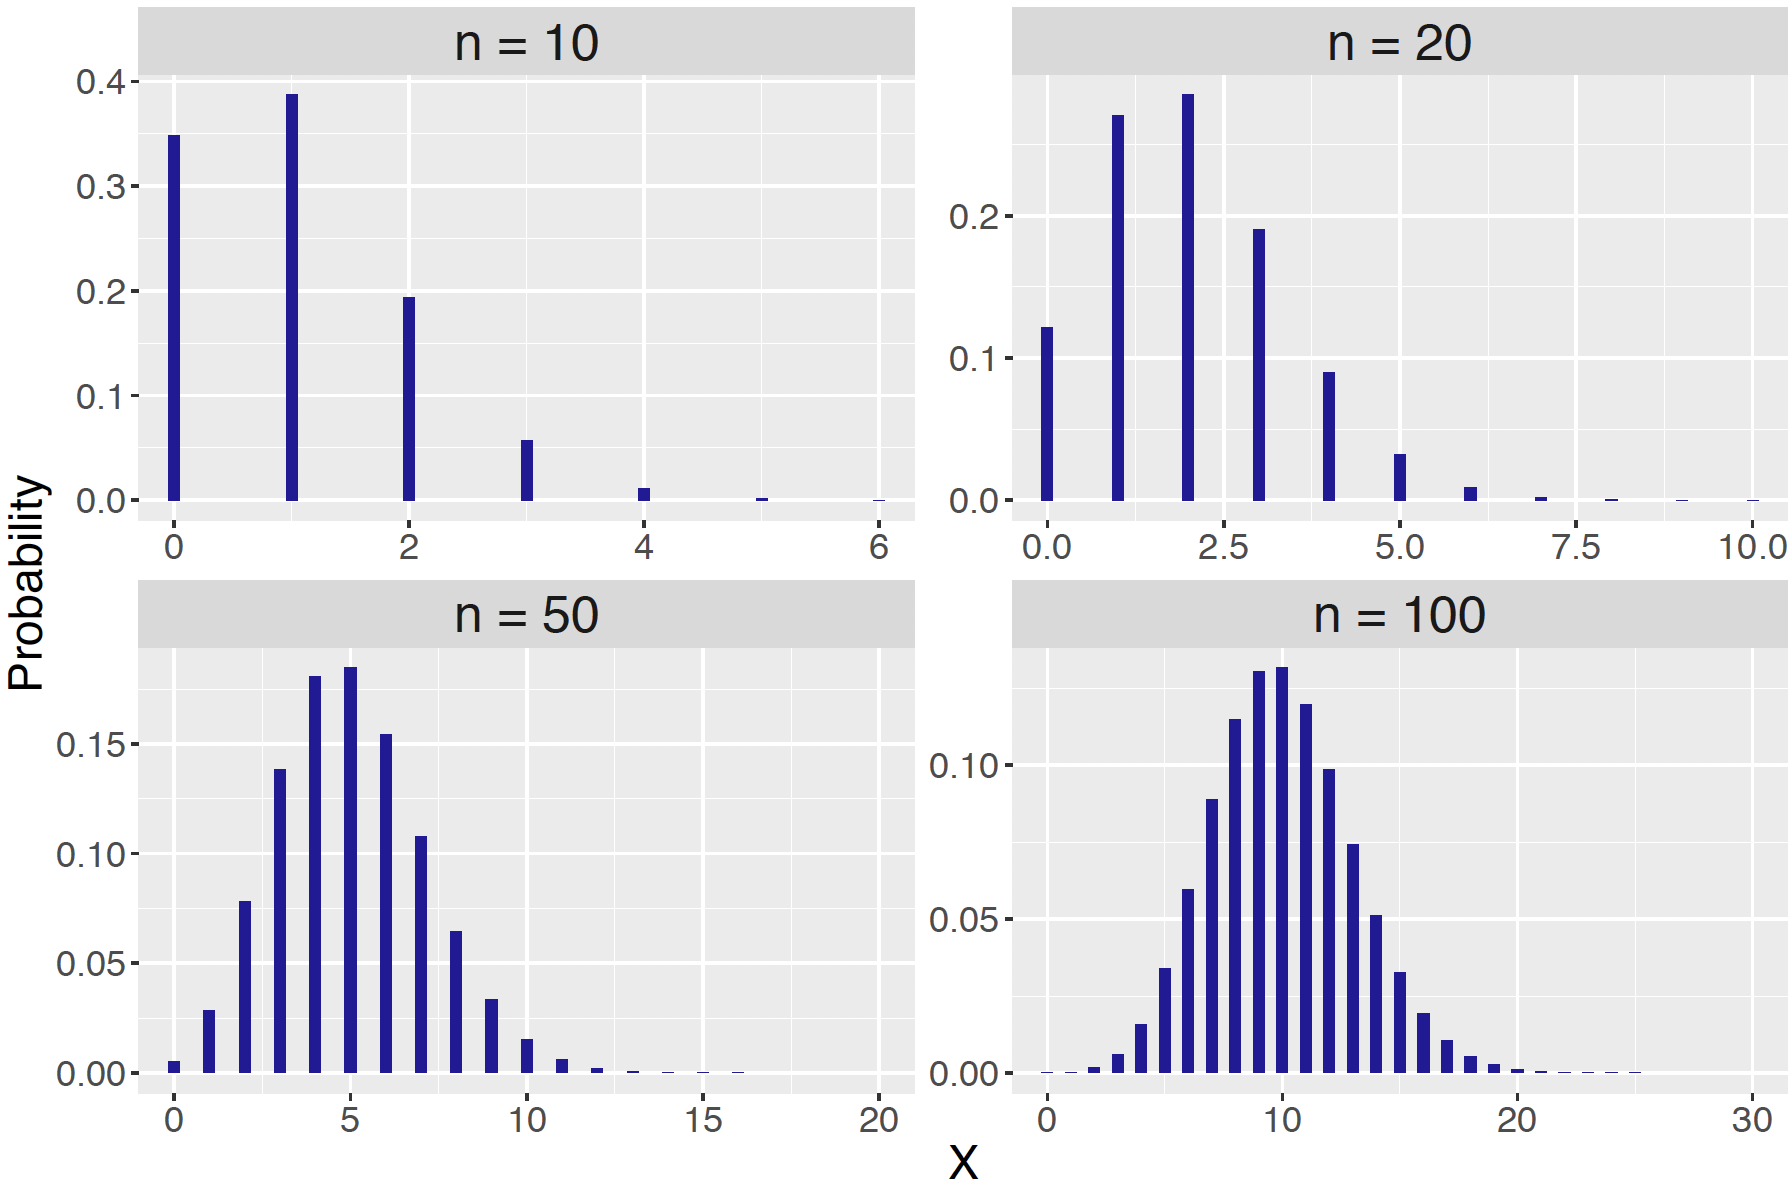 Binomial probabilities for sample sizes $n$ = 10, 20, 50, and 100, and success probability $p = 0.1$.